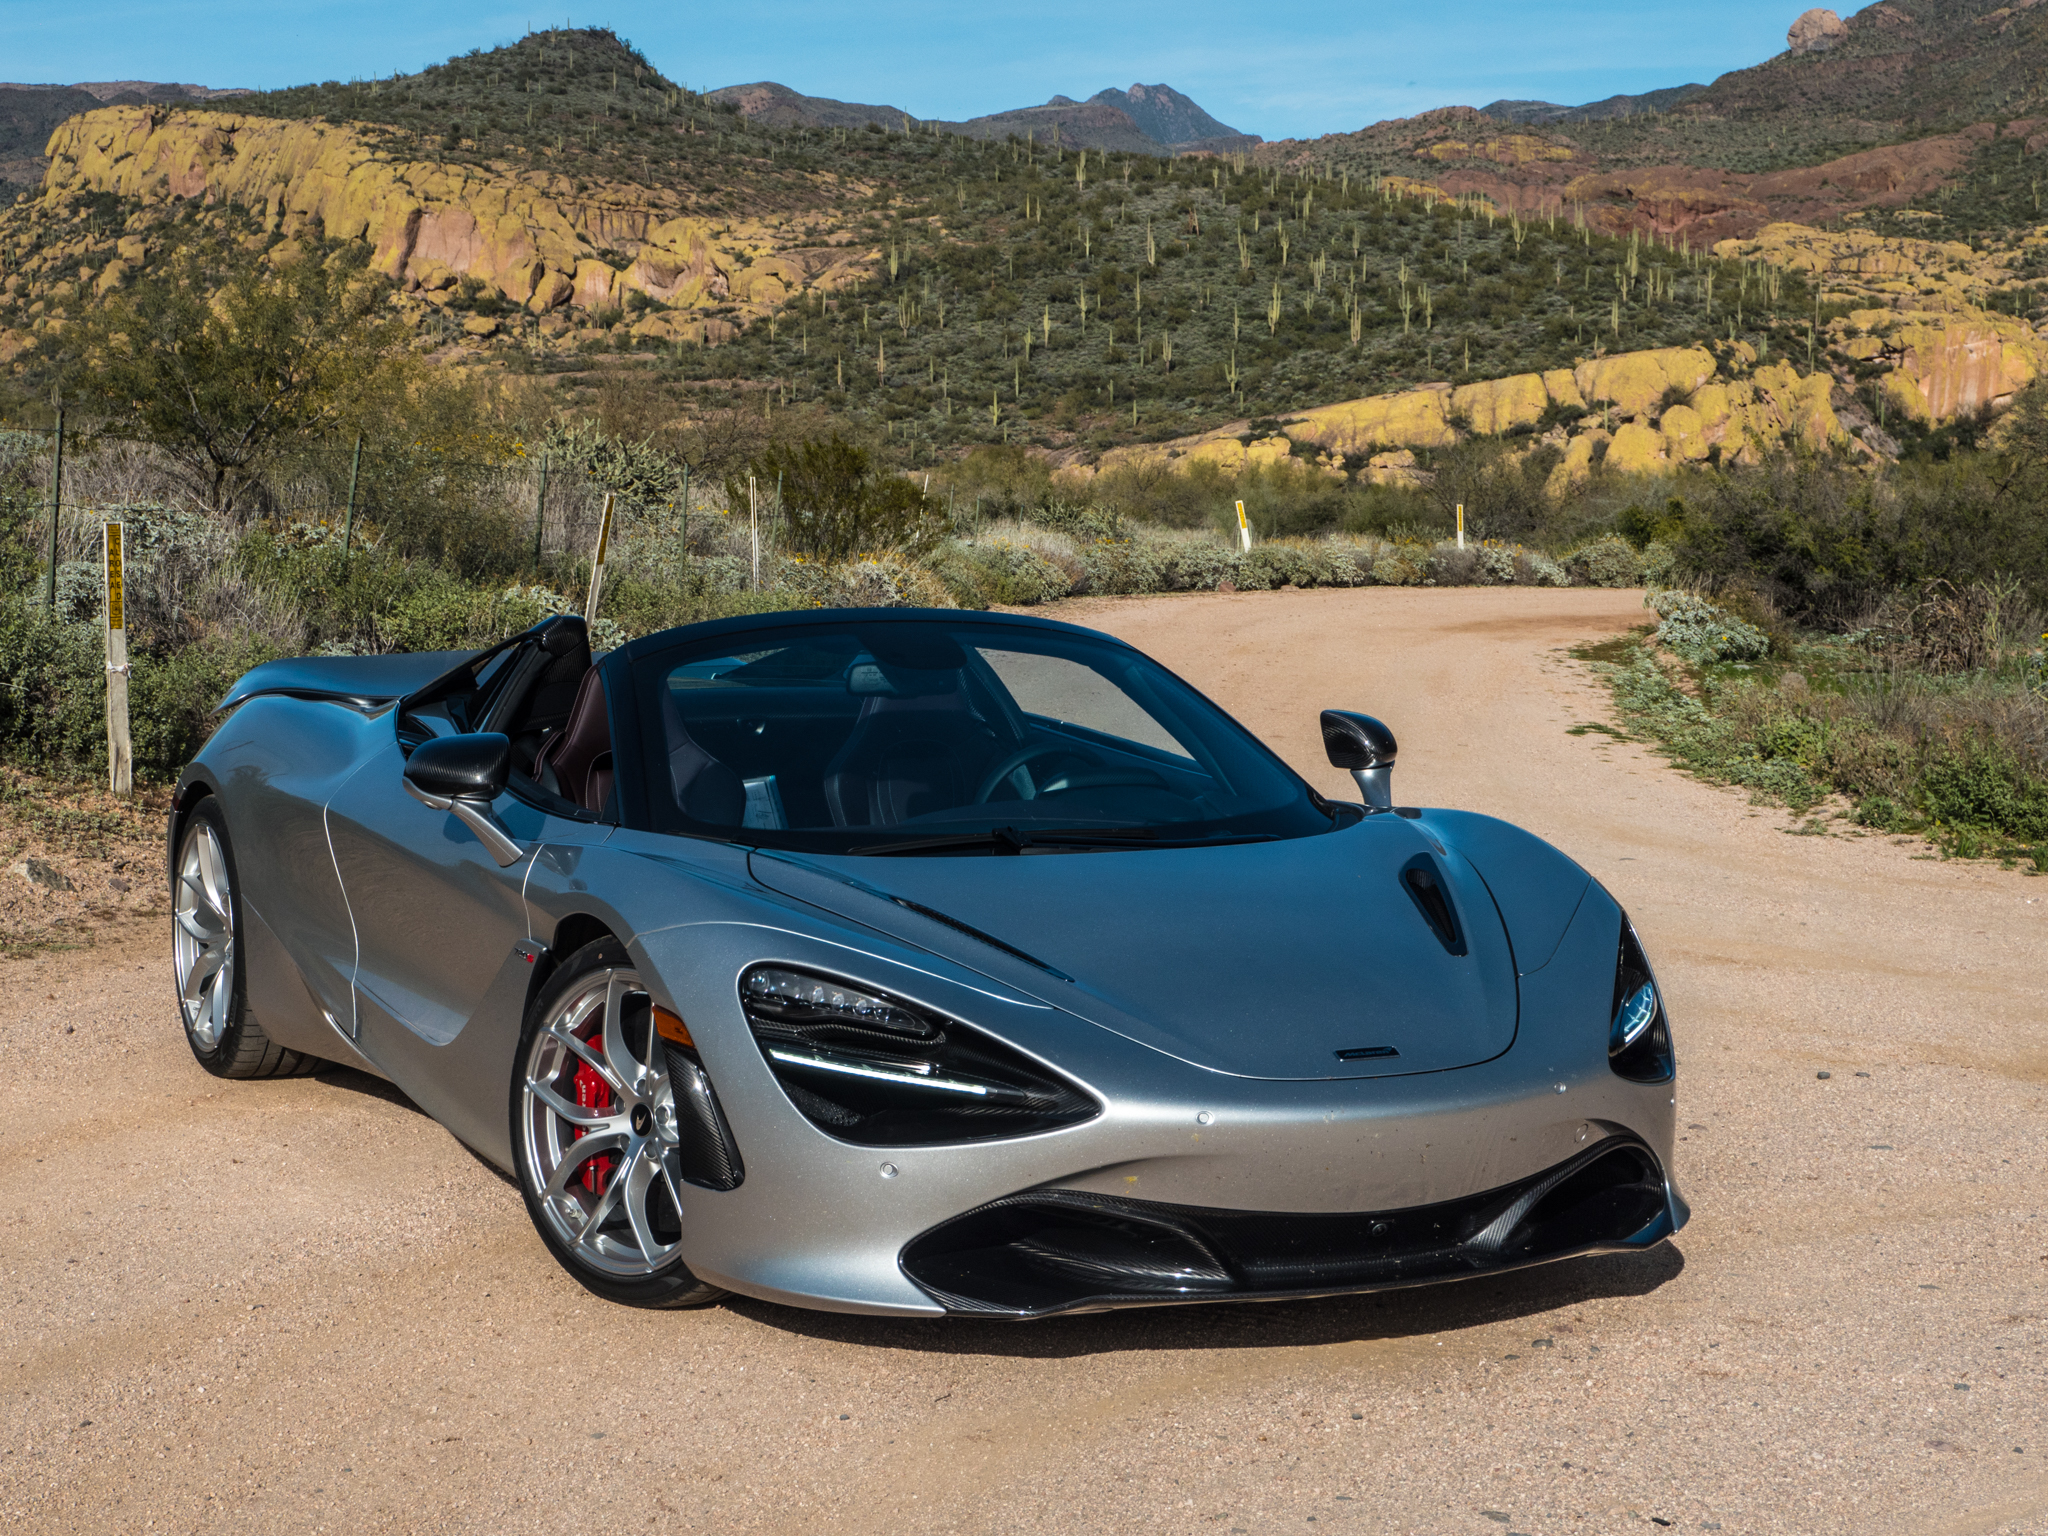 McLaren knocks it out of the park again with the 720S Spider convertible